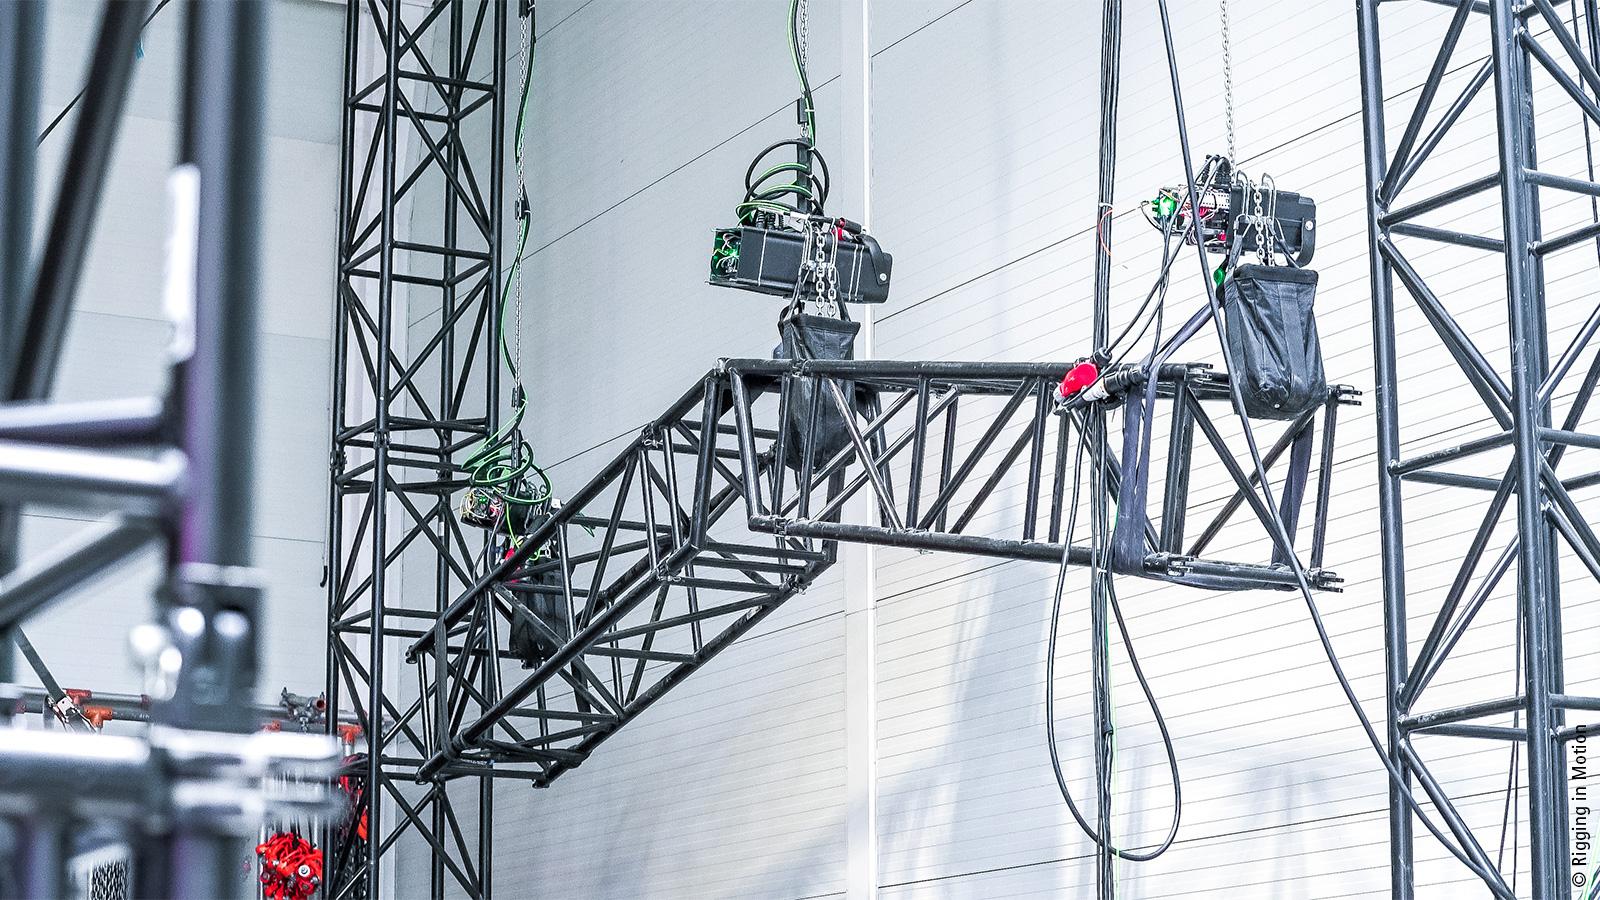 With its headquarters in the Hungarian city of Dunakeszi, Rigging in Motion Ltd specializes in the automation of stage technology. The company’s trusses and rigging platforms are used worldwide in film productions and event stunts – all automated with PC-based control. 